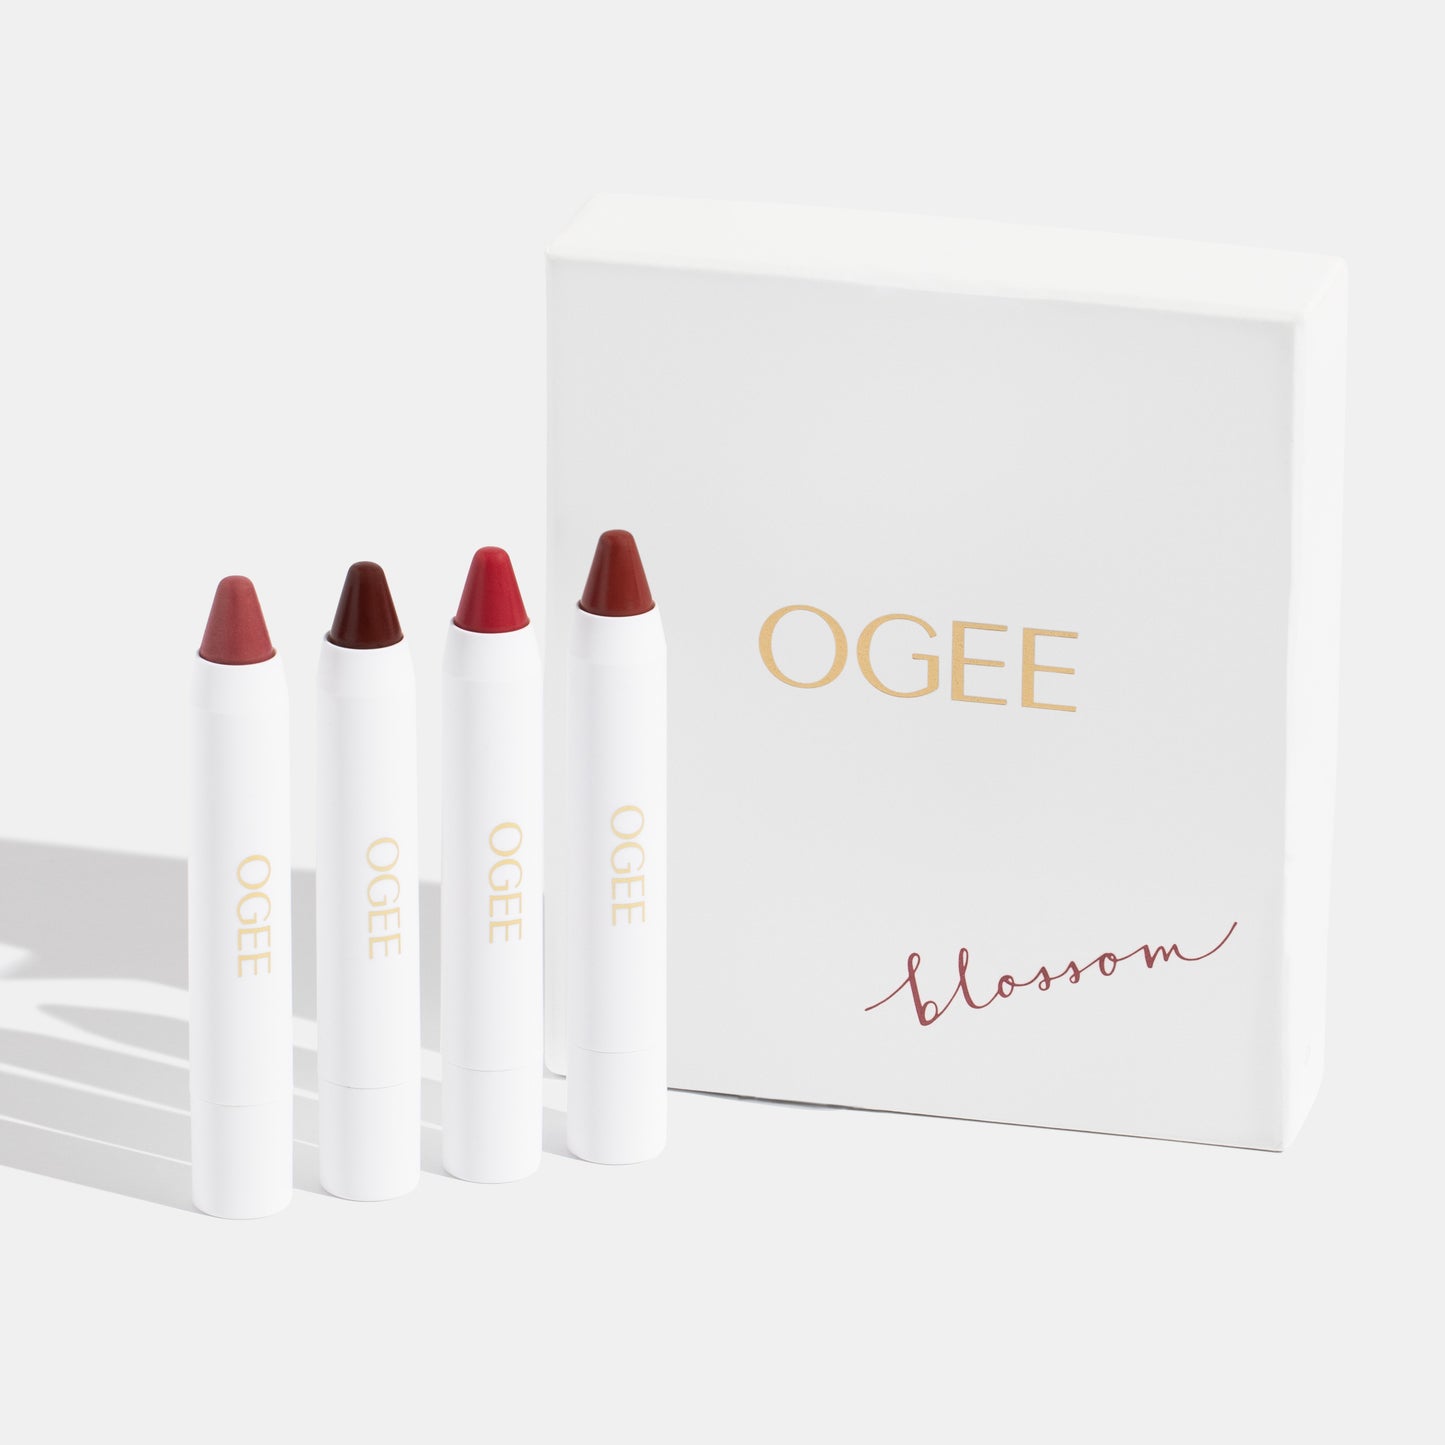 Ogee Women's Tinted Sculpted Lip Oil - Viola